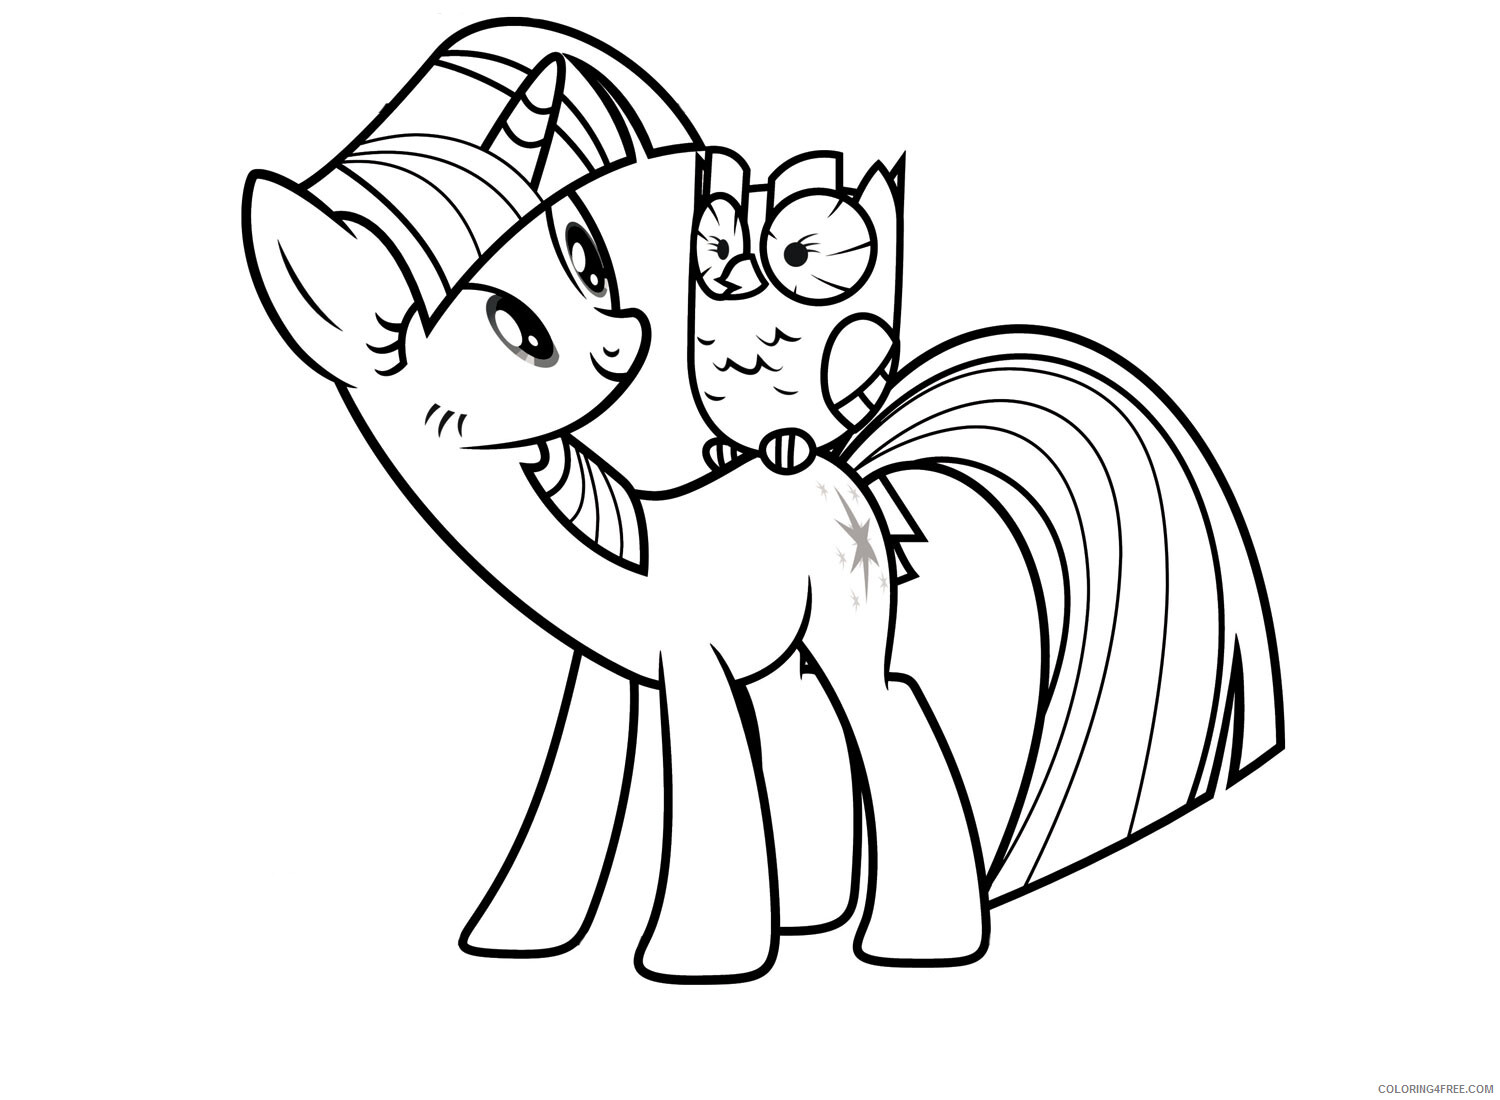 Twilight Sparkle Coloring Pages Twilight Sparkle adn Owl Printable 2021 5987 Coloring4free